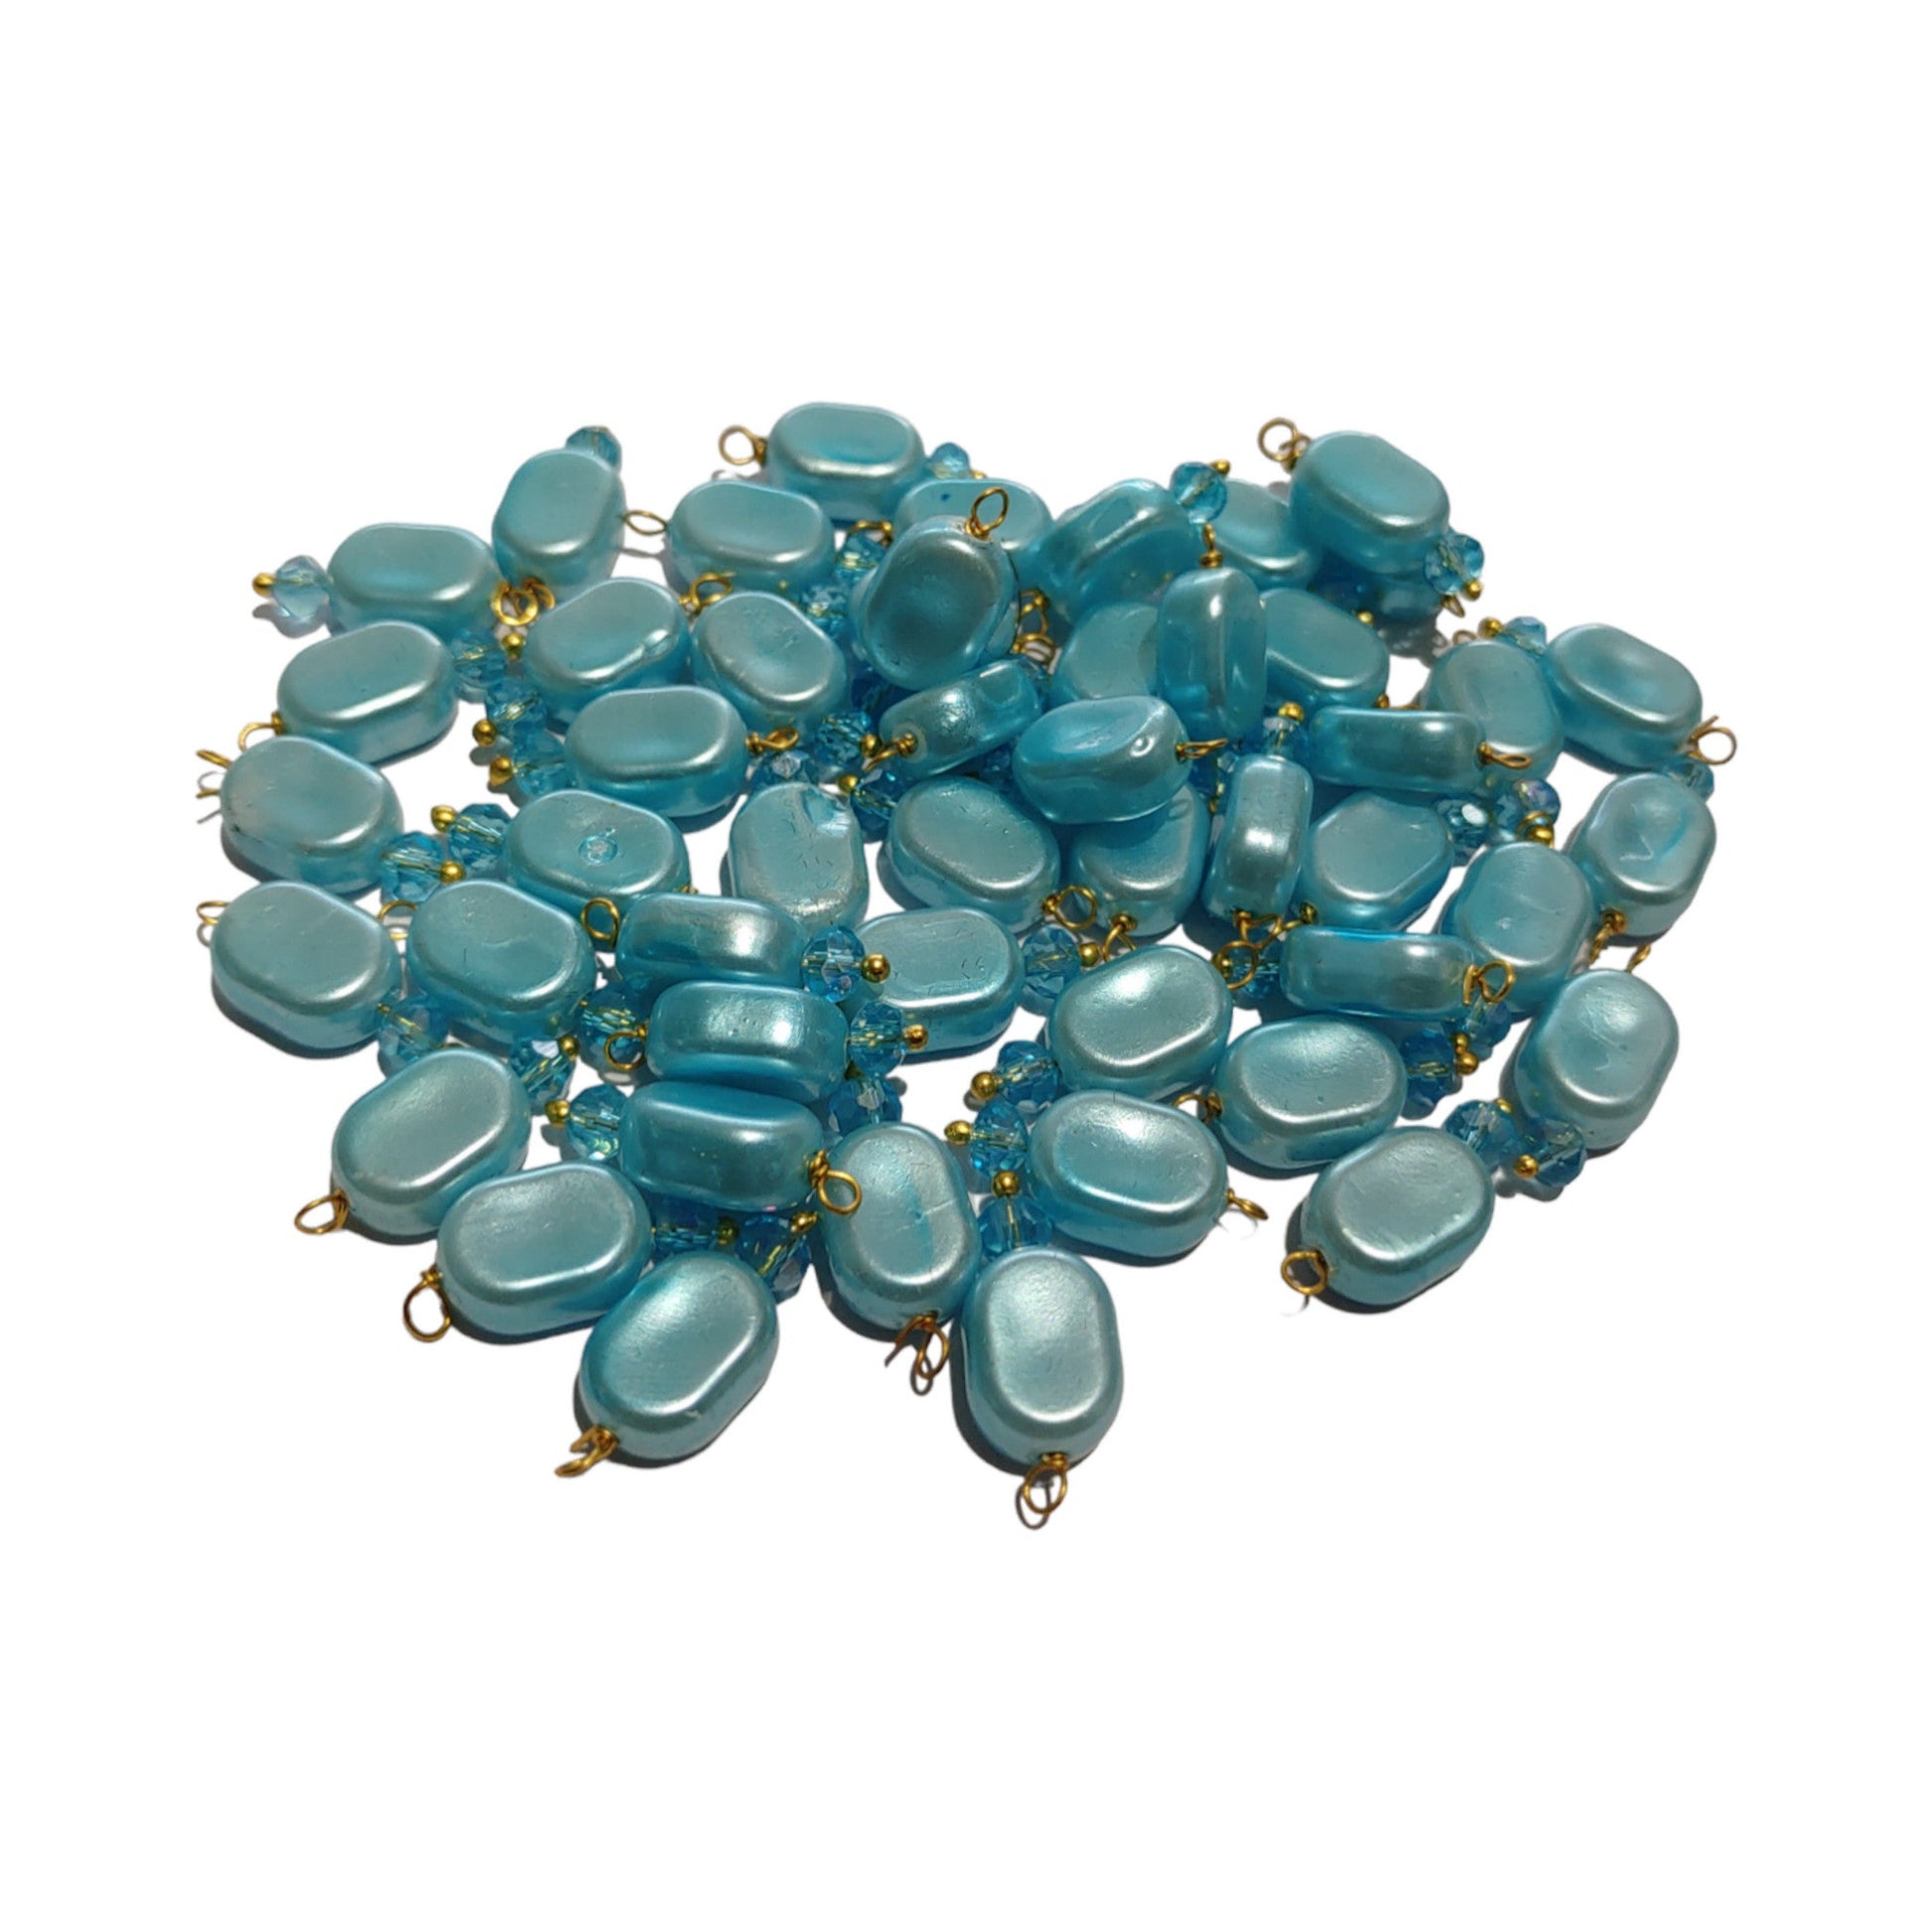 Indian Petals 100Pcs Colored Plastic Bead with Crystal Ball Drop for Craft Décor or Jewelry Making, 8x12mm, Aqua